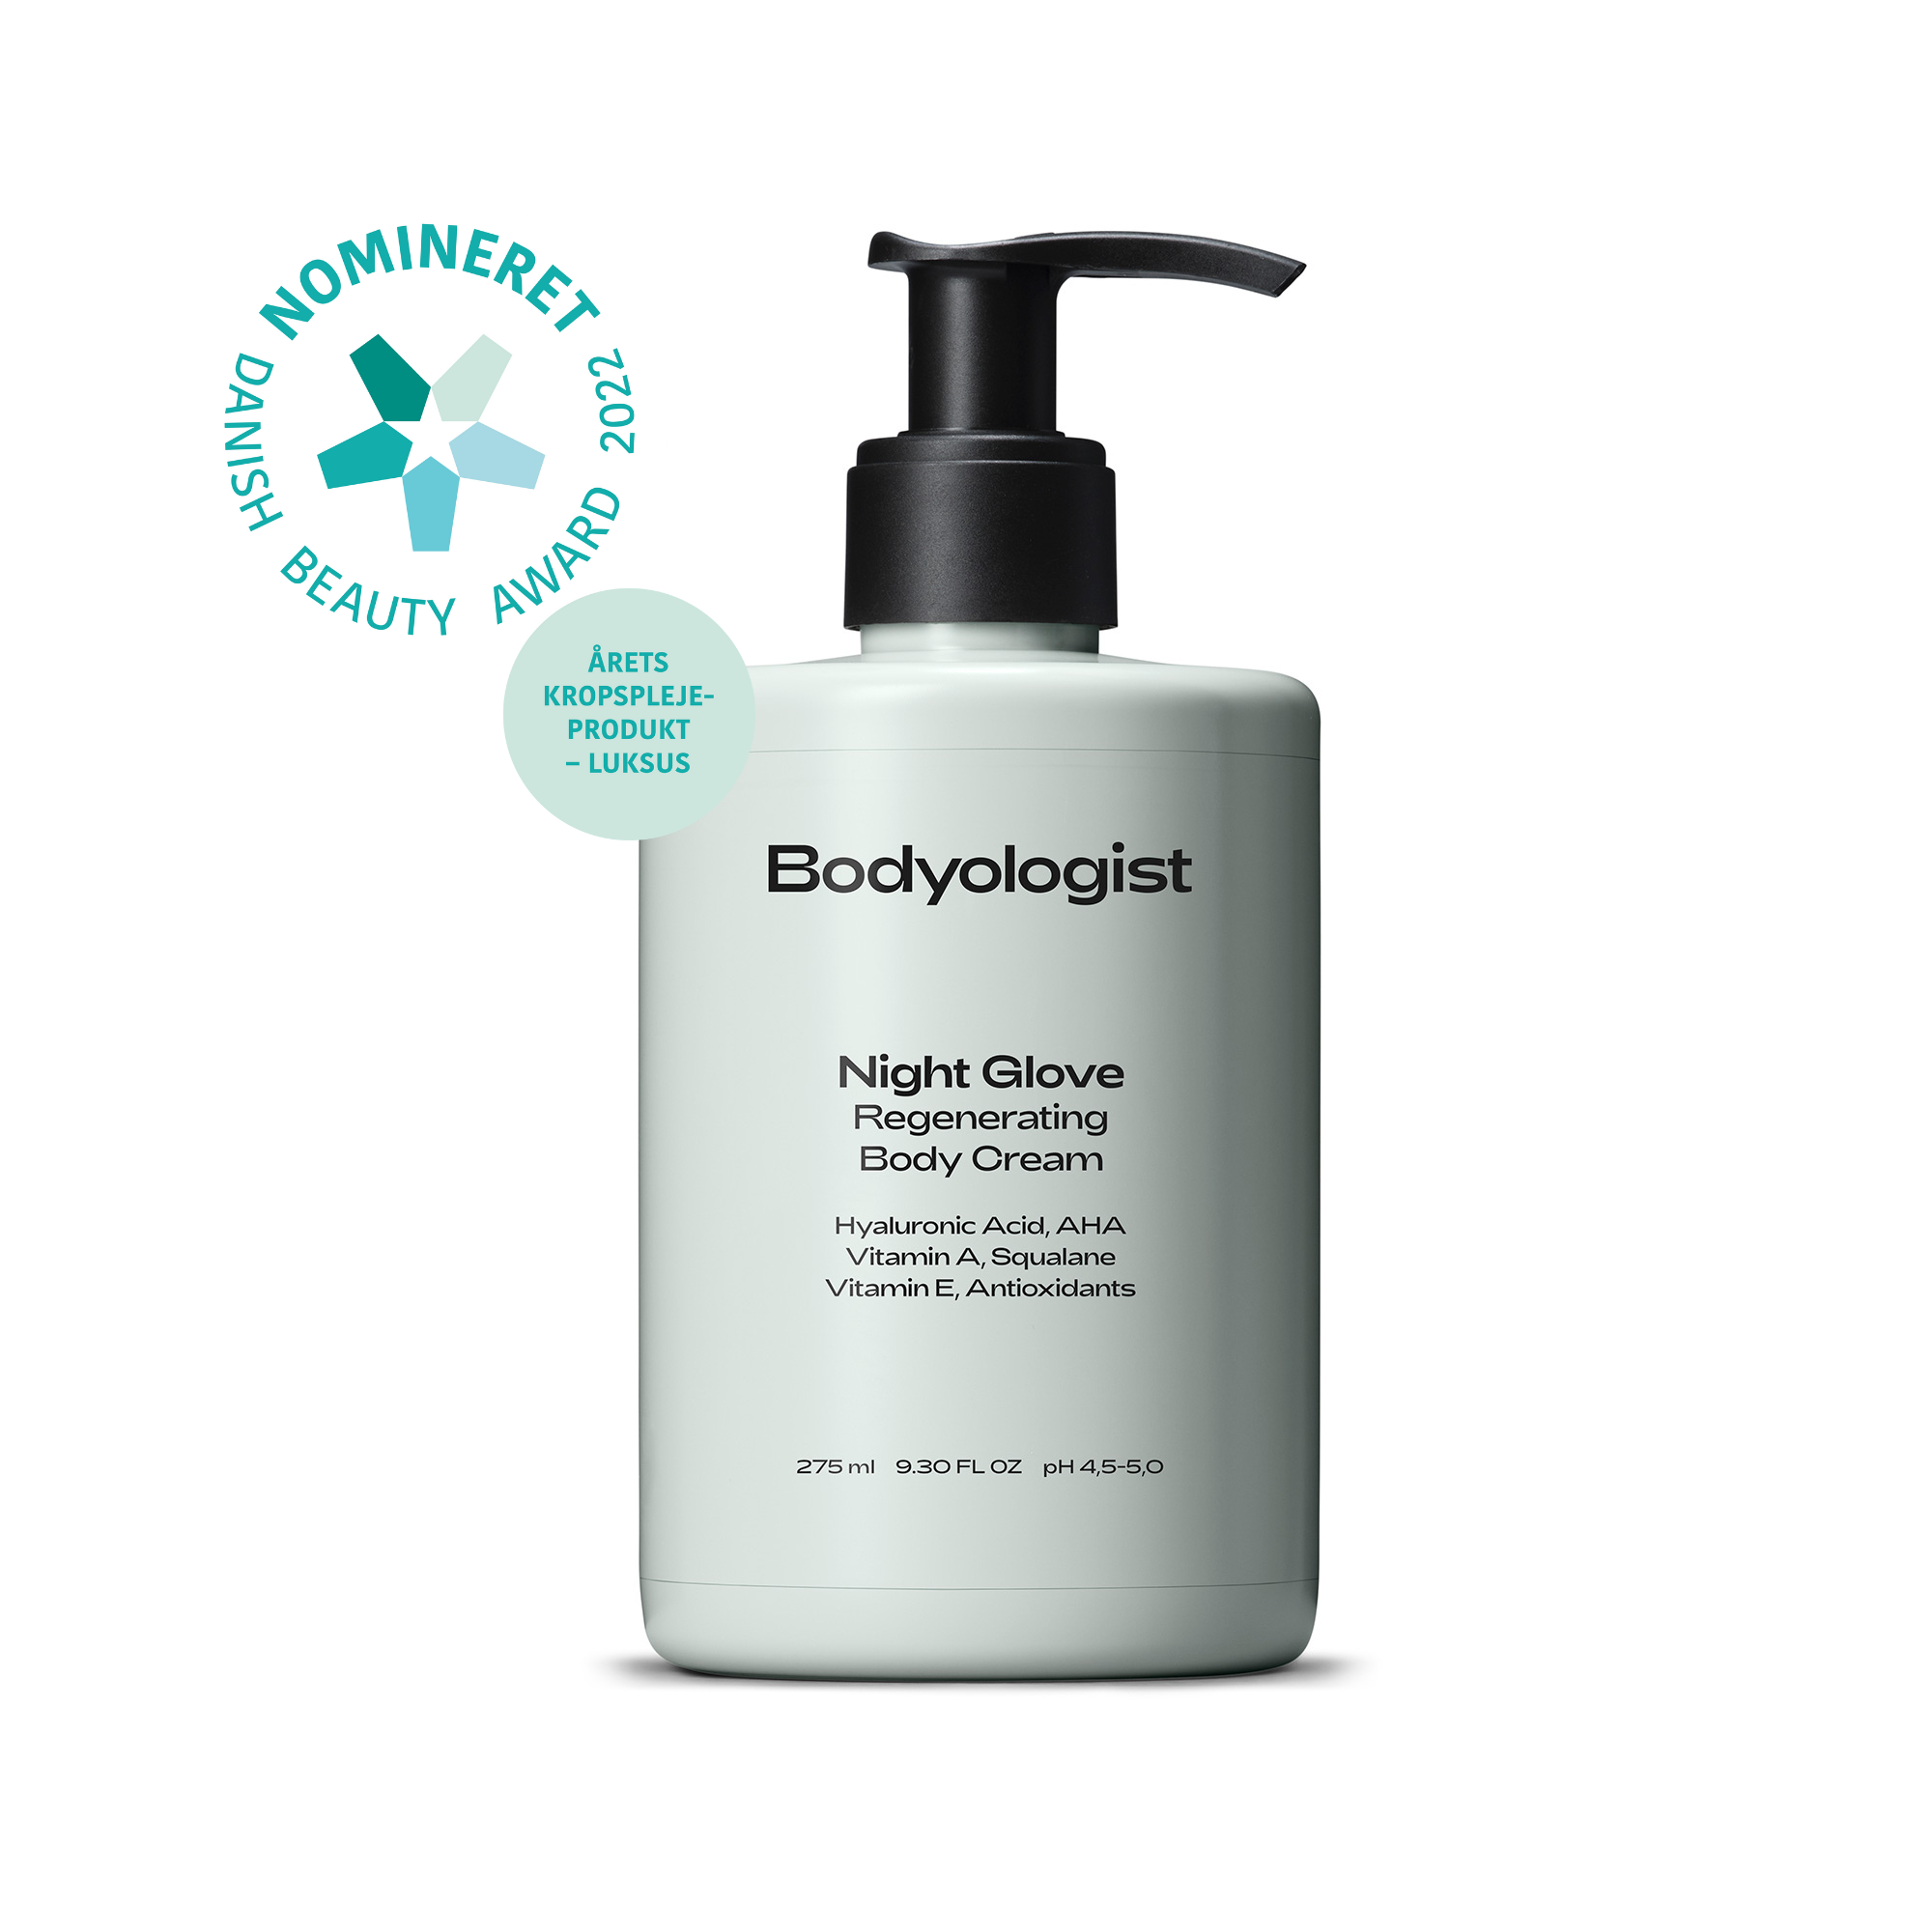 Best bodycare brand - Bodyologist skincare products for the body